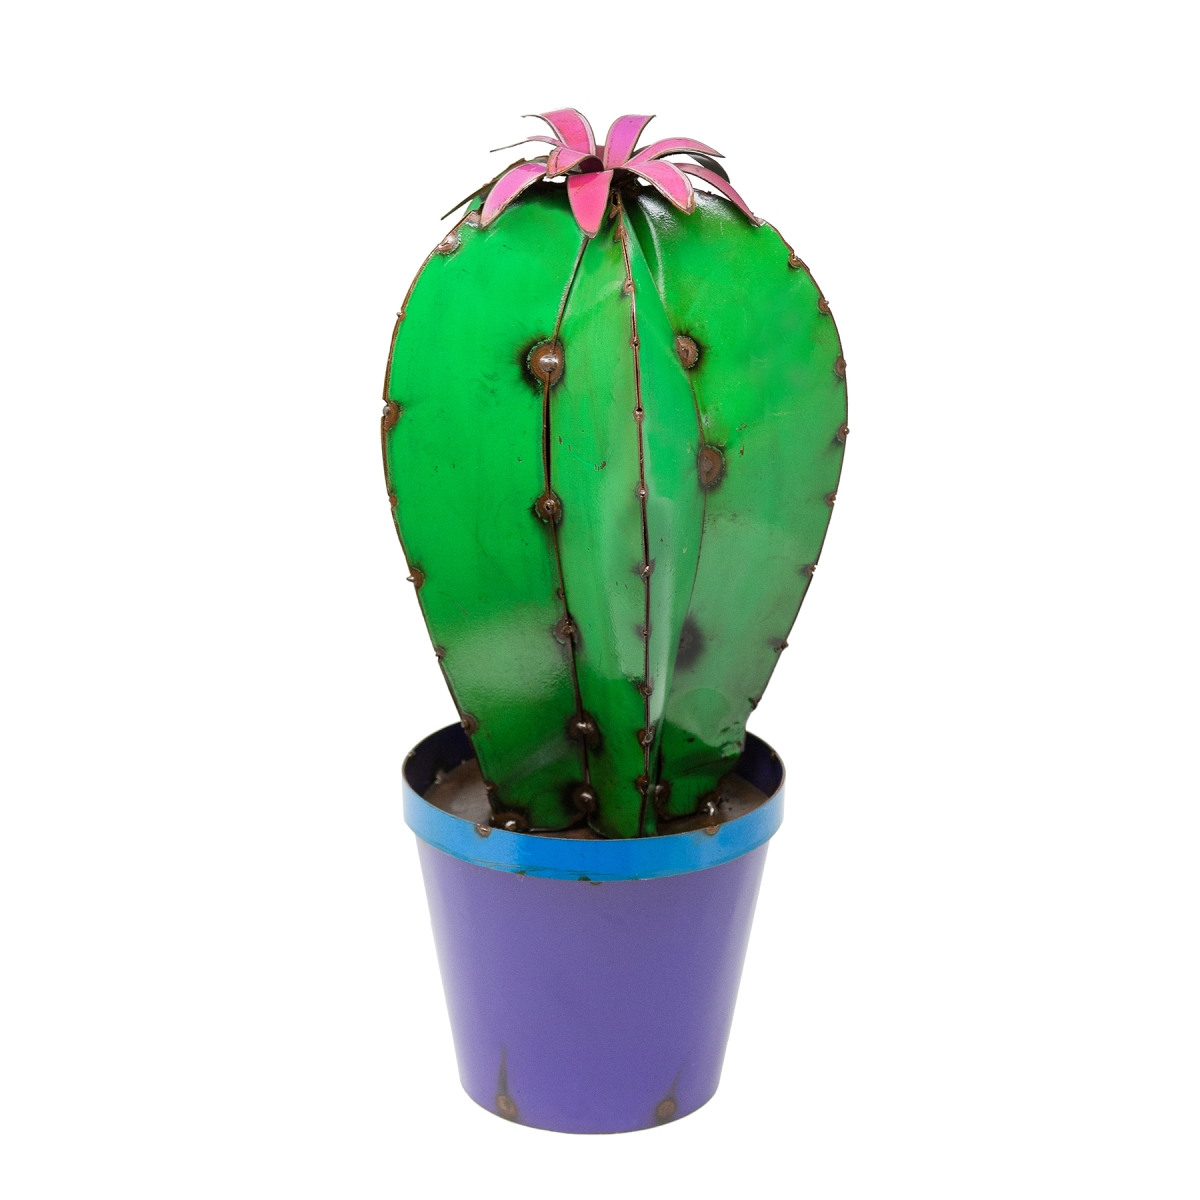 100989 Cactus In Pot With Flower Garden Statue - Tall